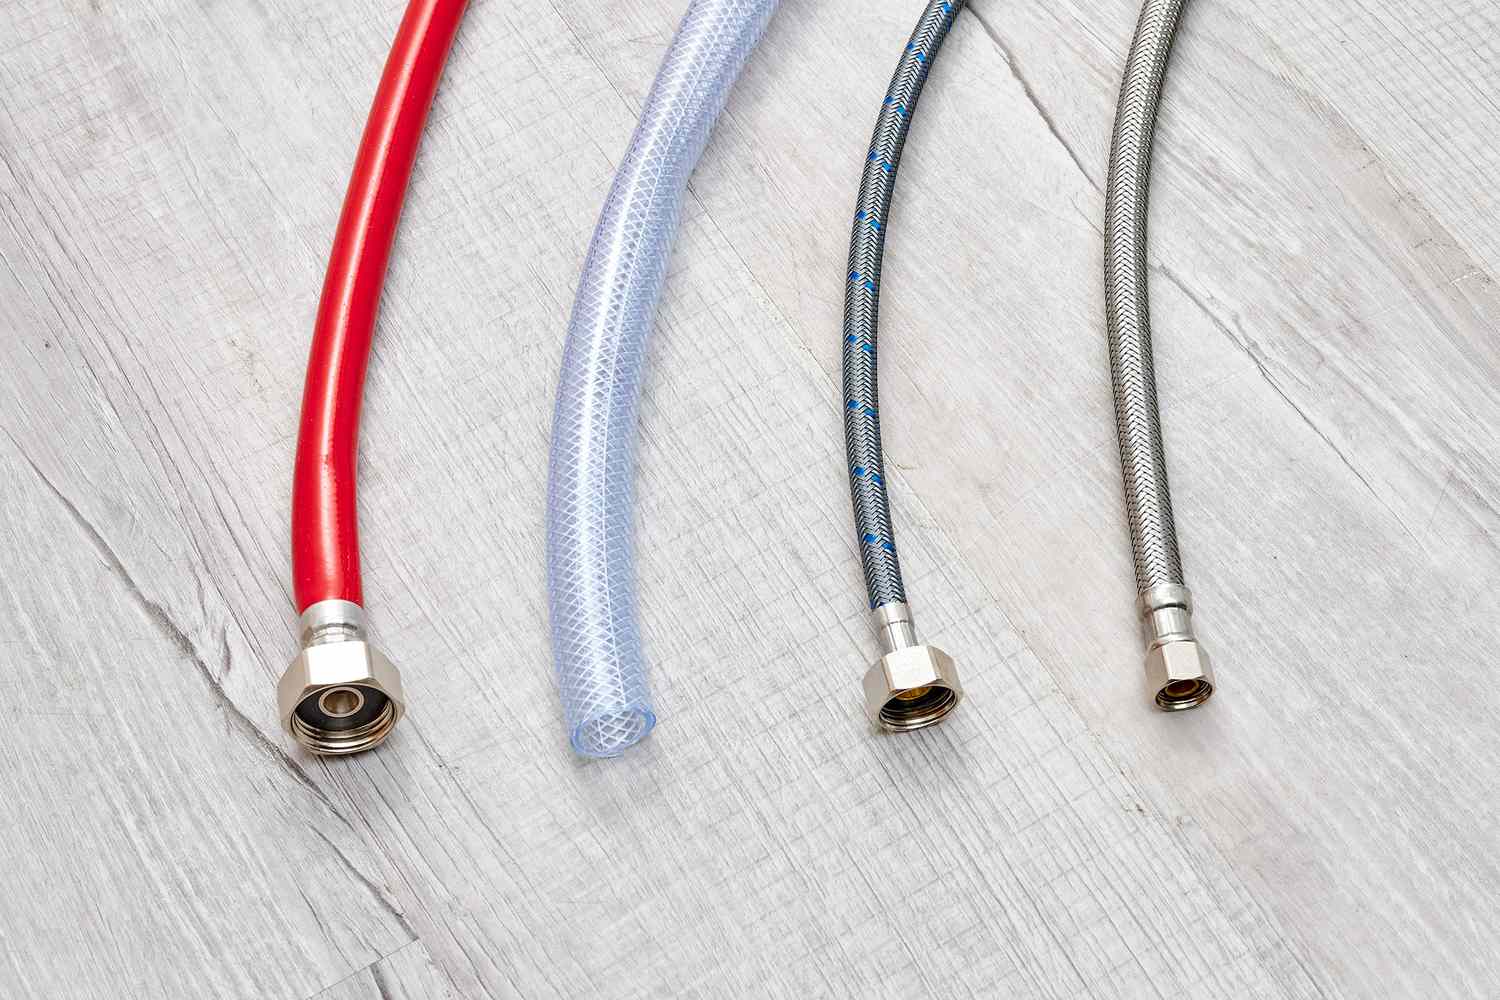 How To Use Flex Pipe For Plumbing